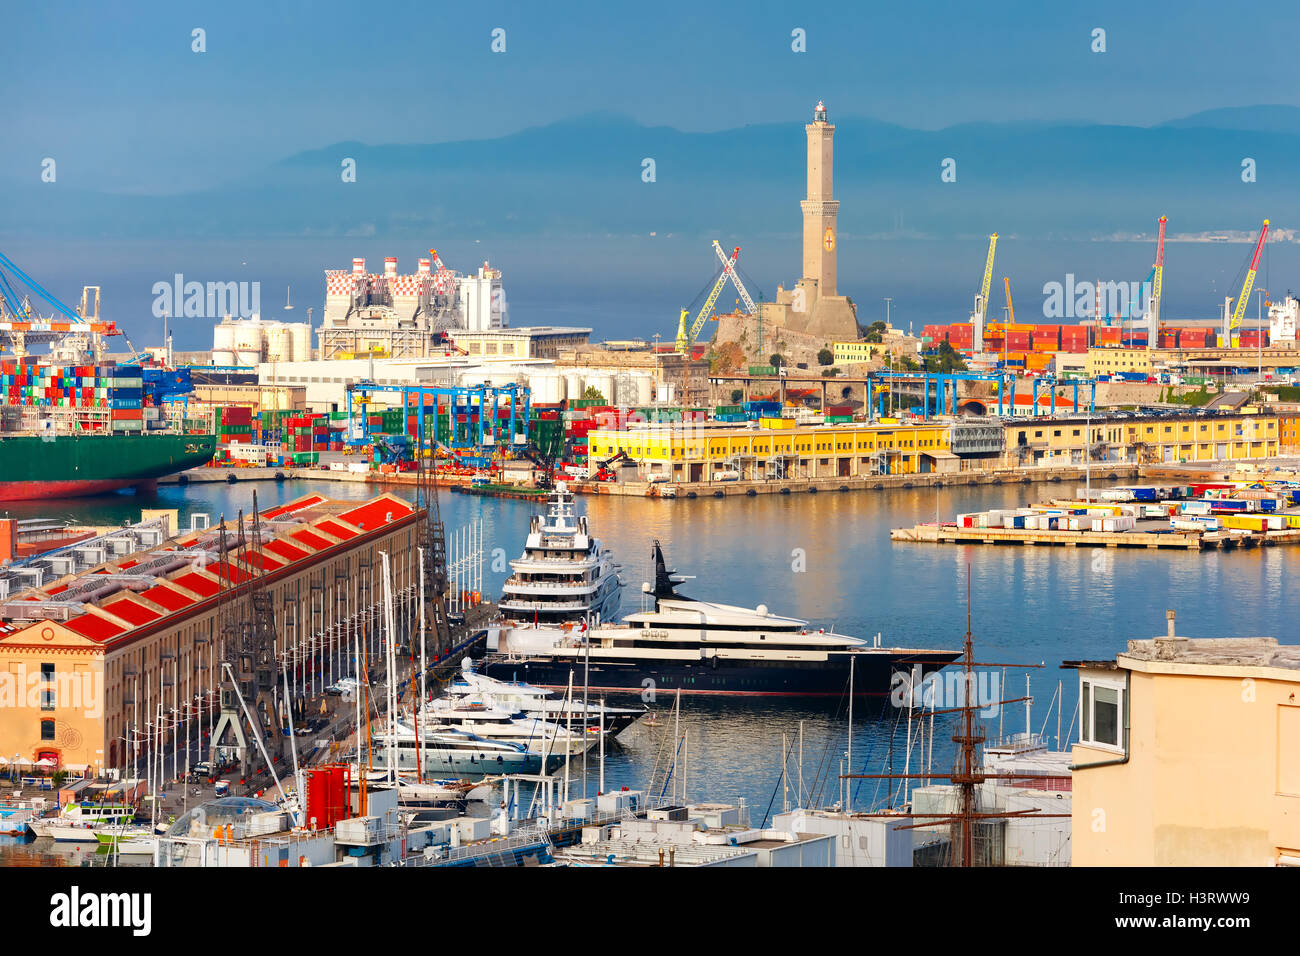 Old Lighthouse in port of Genoa, Italy. Stock Photo